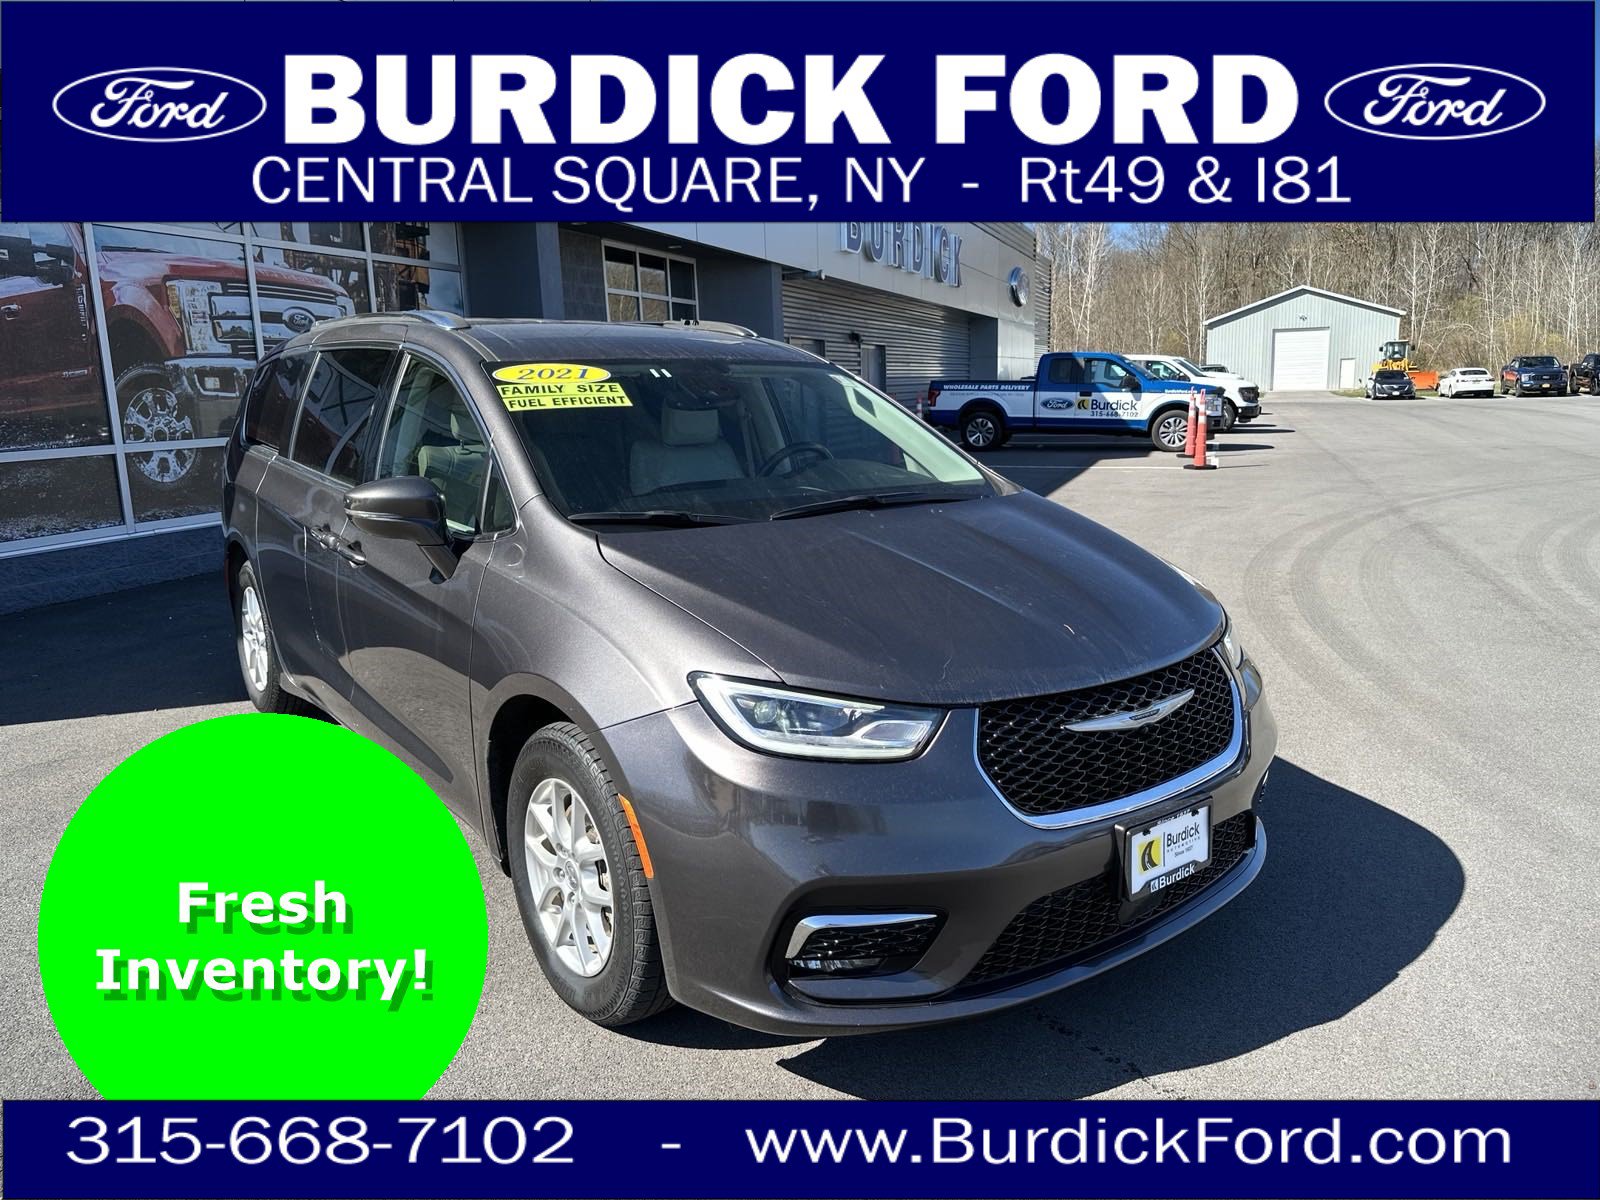 2021 Chrysler Pacifica Central Square NY